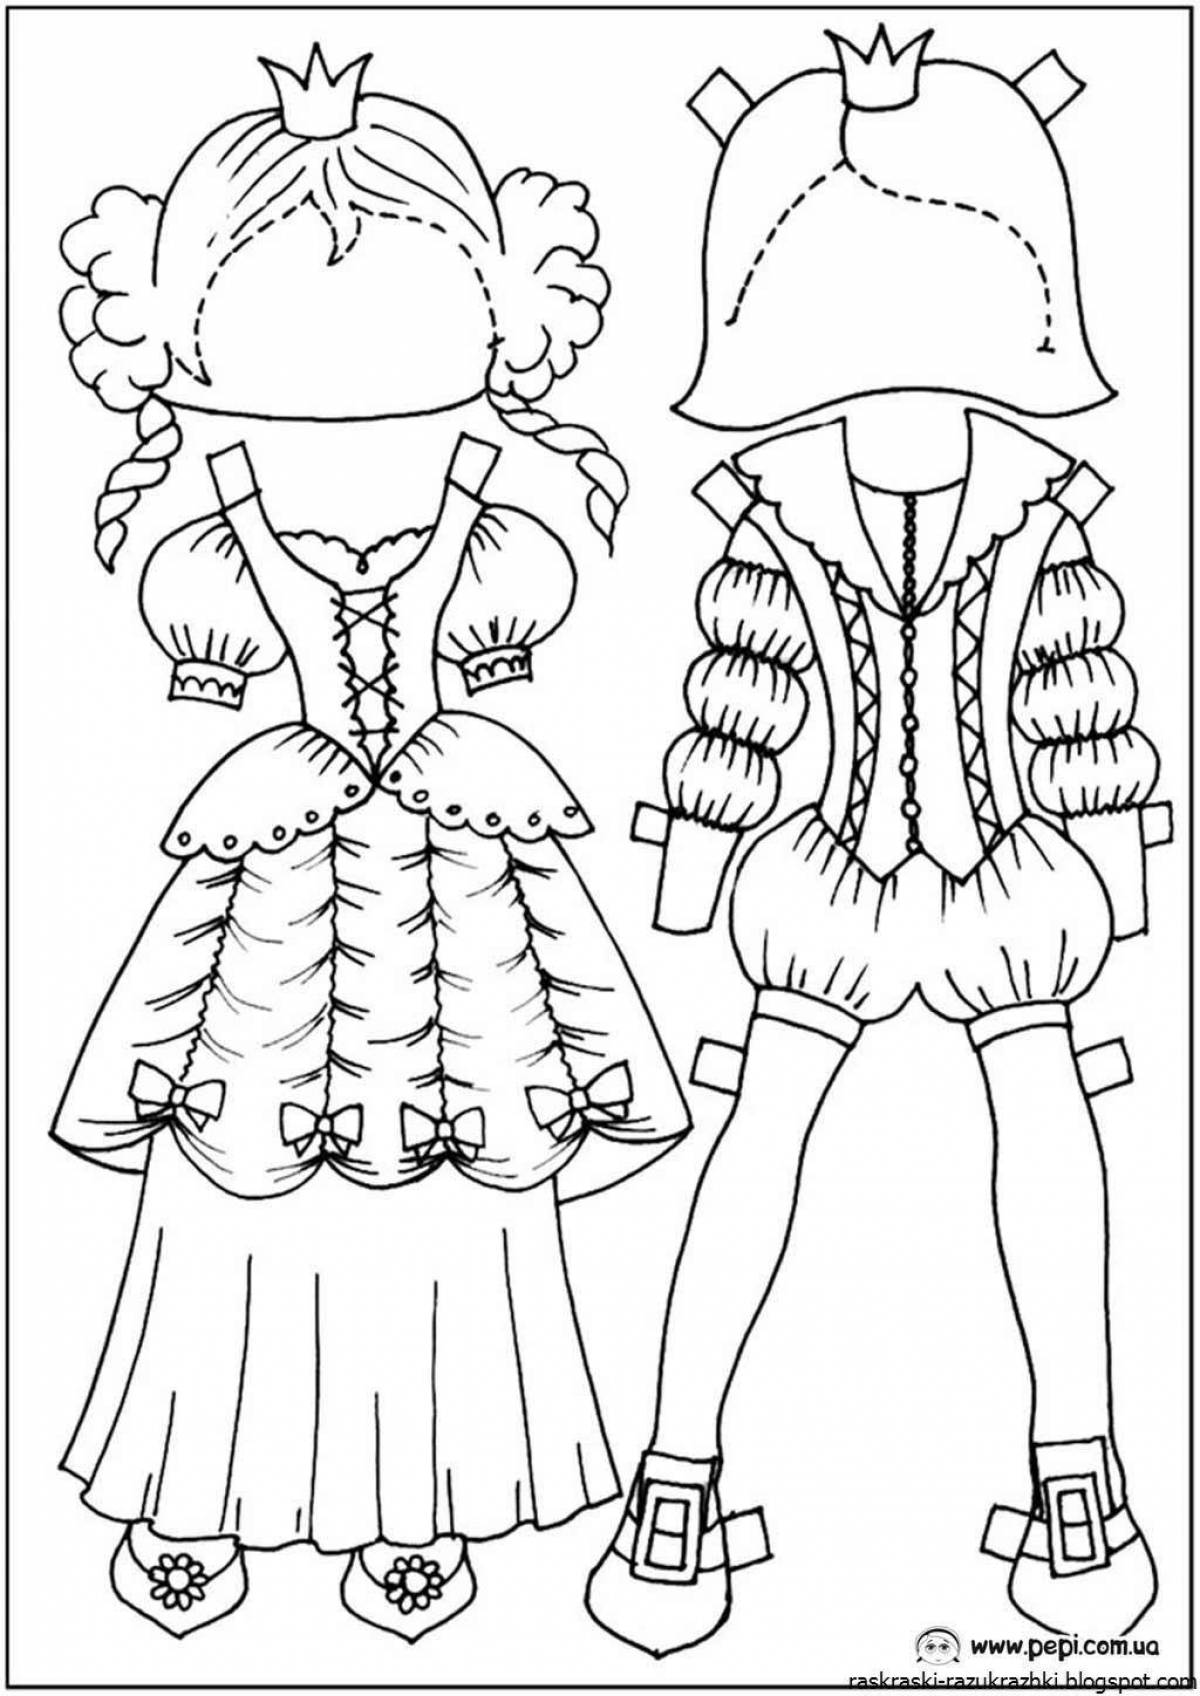 Coloring page glamorous carnival costume